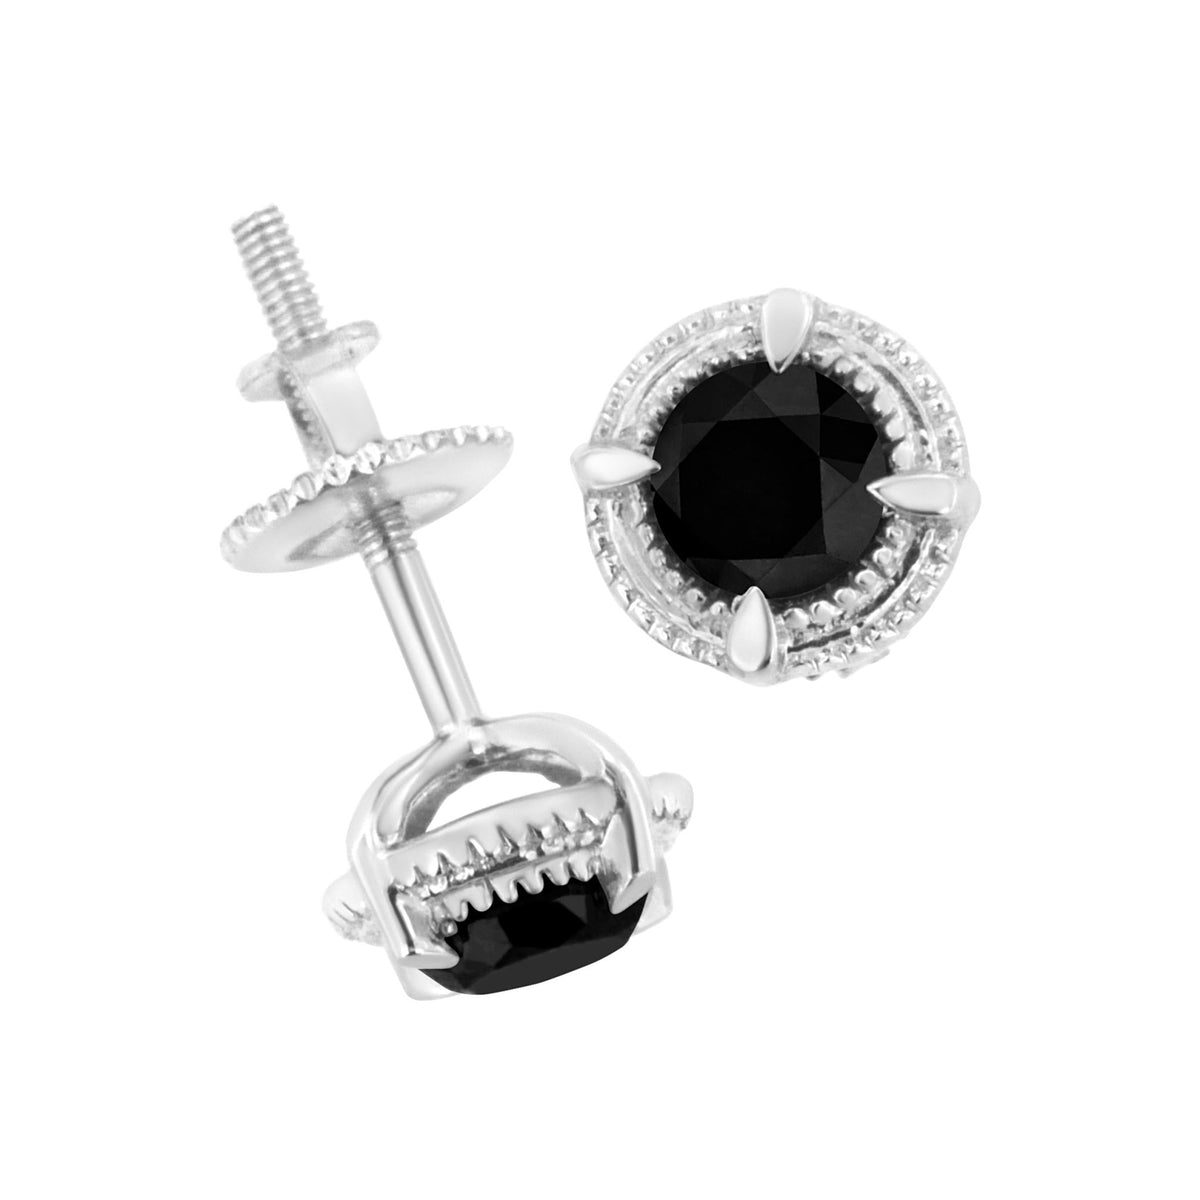 .925 Sterling Silver 2 cttw Treated Black Diamond Modern 4-Prong Solitaire Milgrain Stud Earrings (Black Color, I1-I2 Clarity) - LinkagejewelrydesignLinkagejewelrydesign